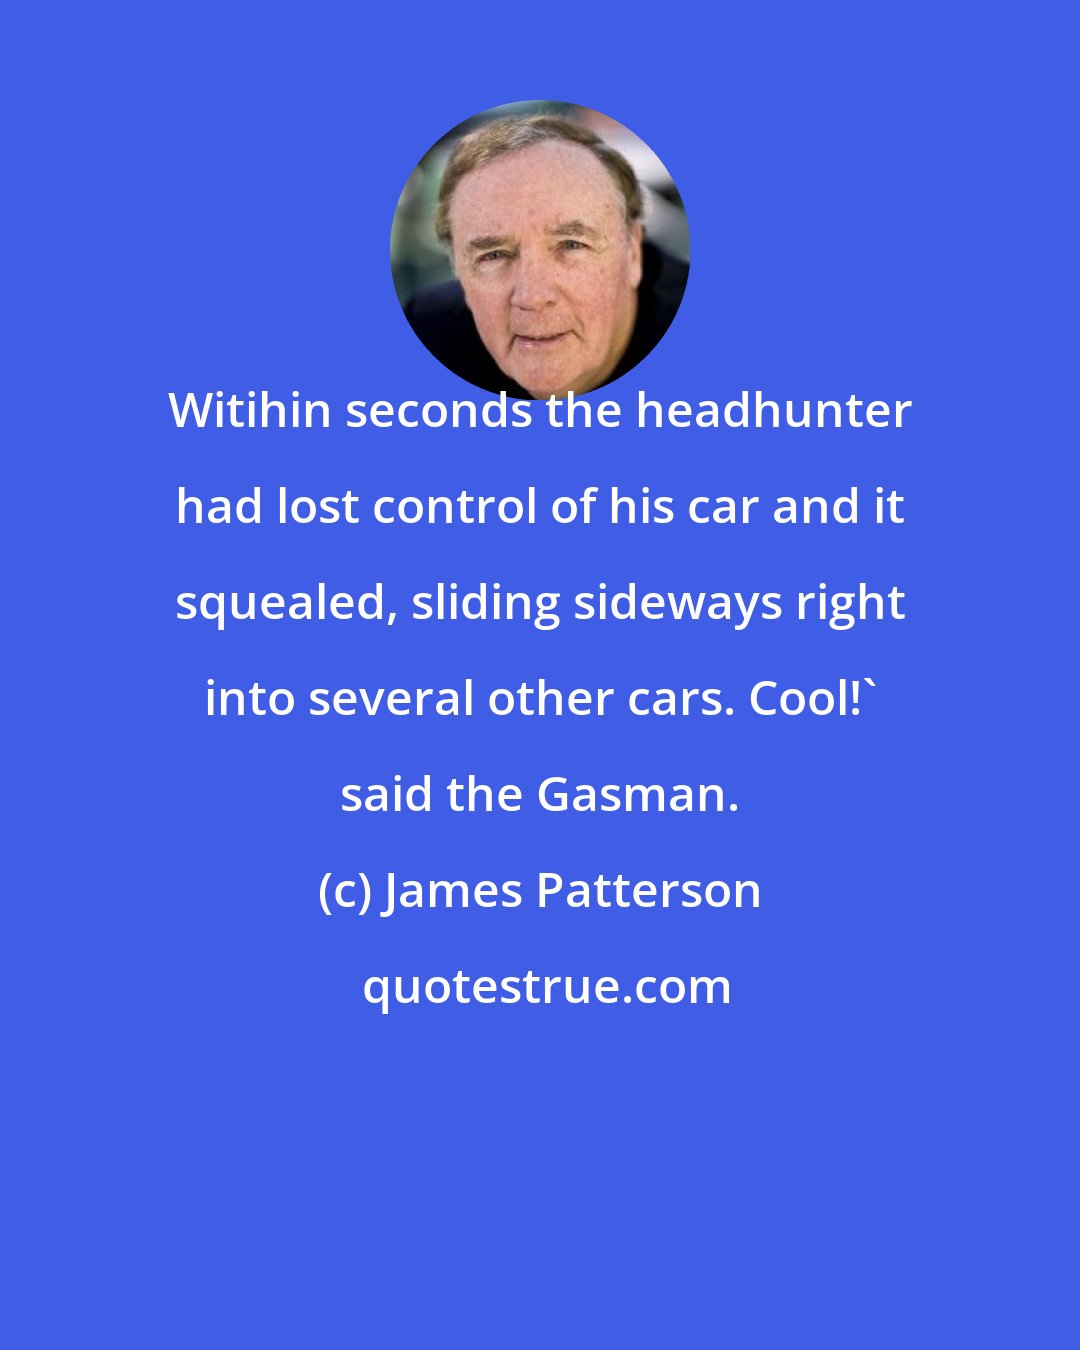 James Patterson: Witihin seconds the headhunter had lost control of his car and it squealed, sliding sideways right into several other cars. Cool!' said the Gasman.